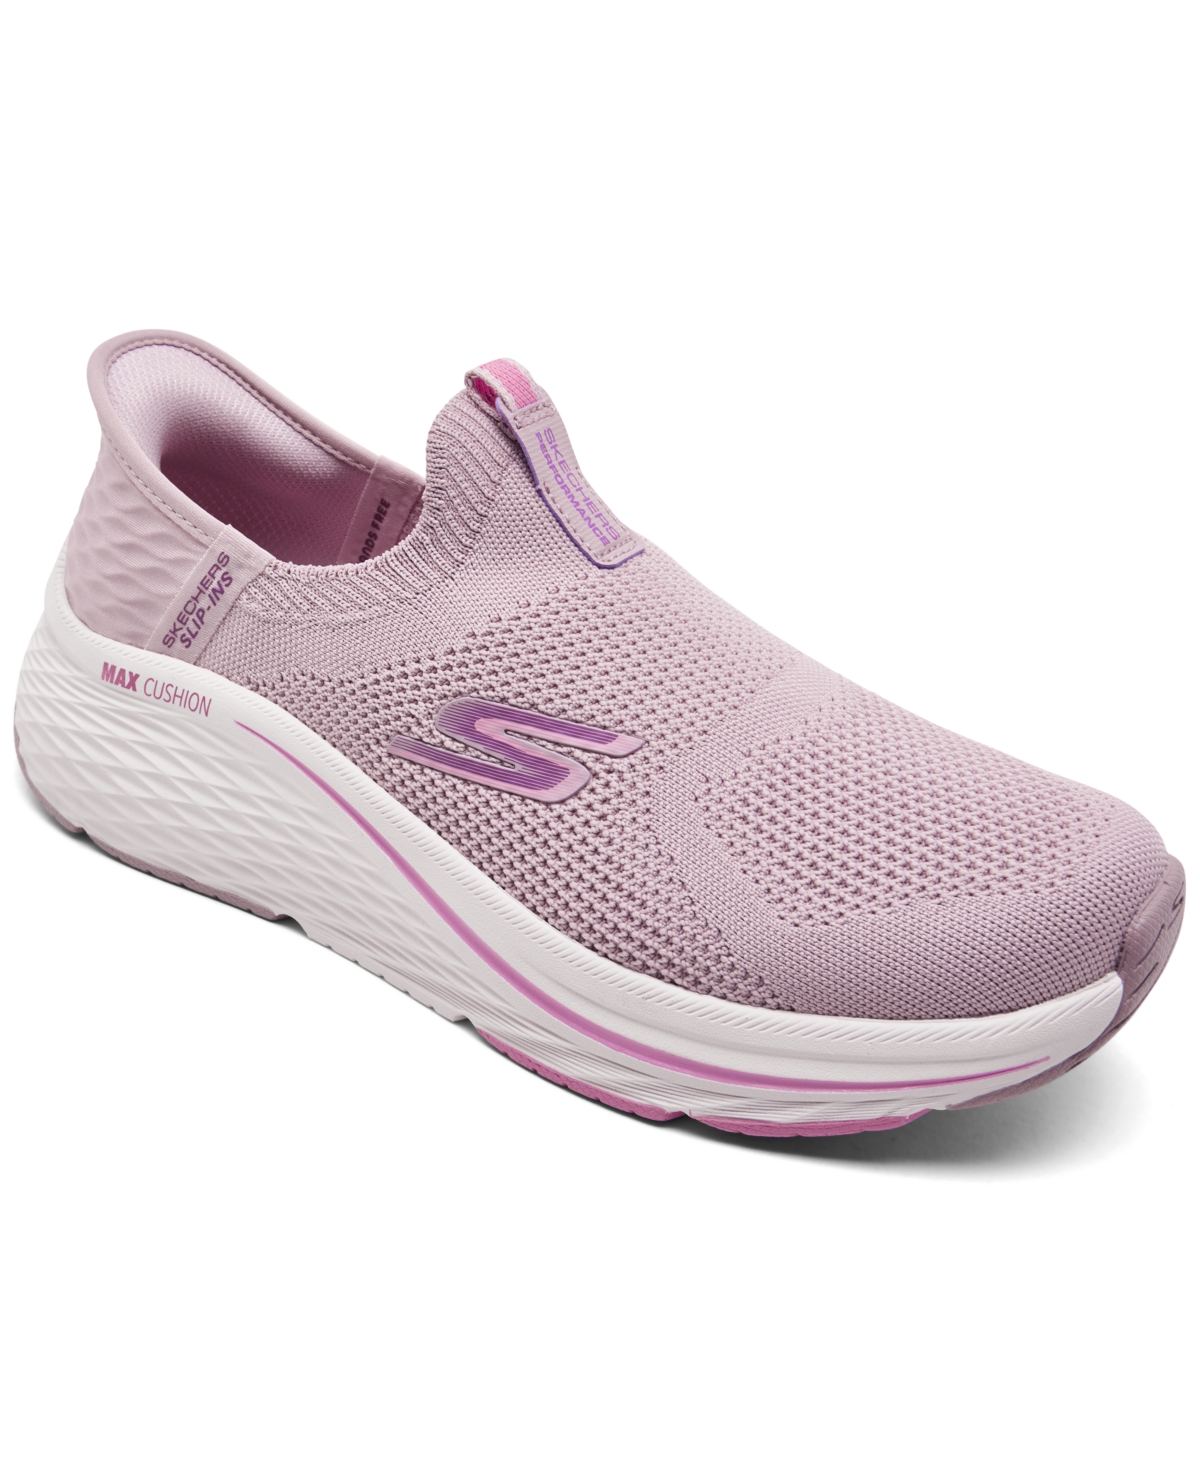 Women's Athletic Running Sneakers from Finish Line - Mauve